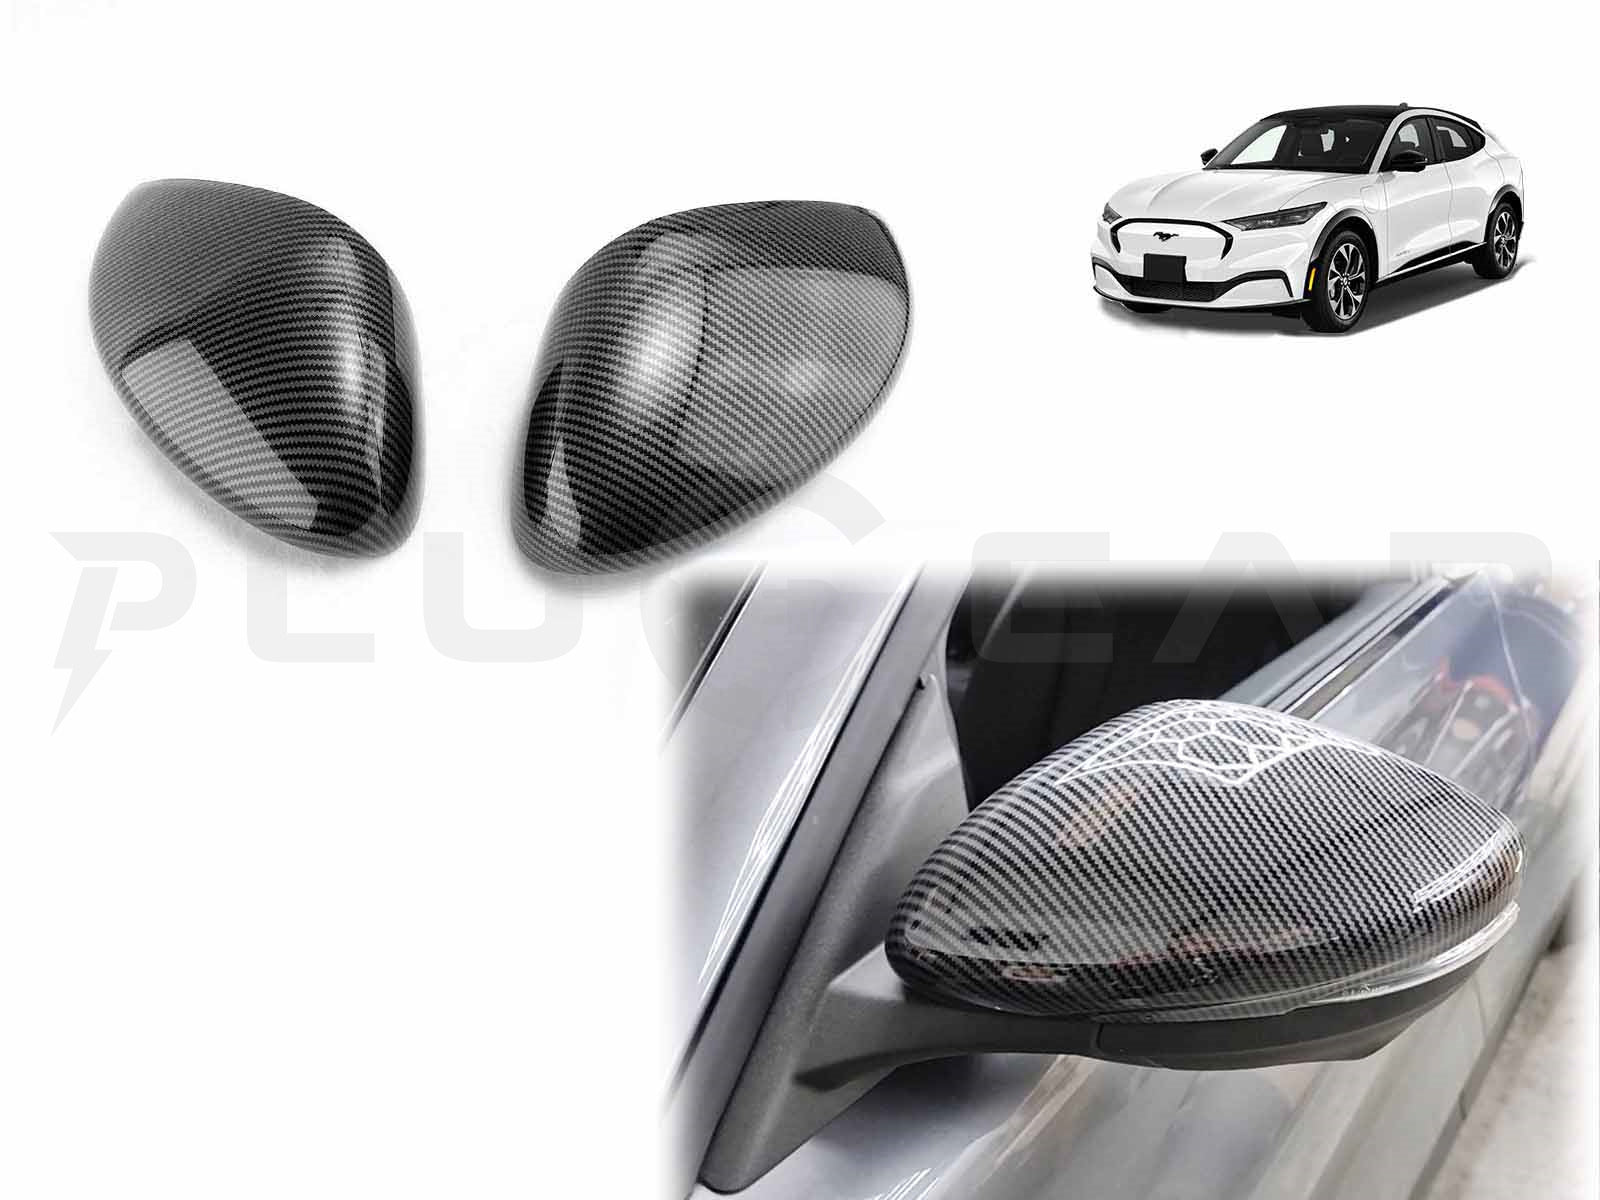 Ford Mustang Mach-e: Side Mirror Overlays, Rear View Mirror Cover (2 pcs)